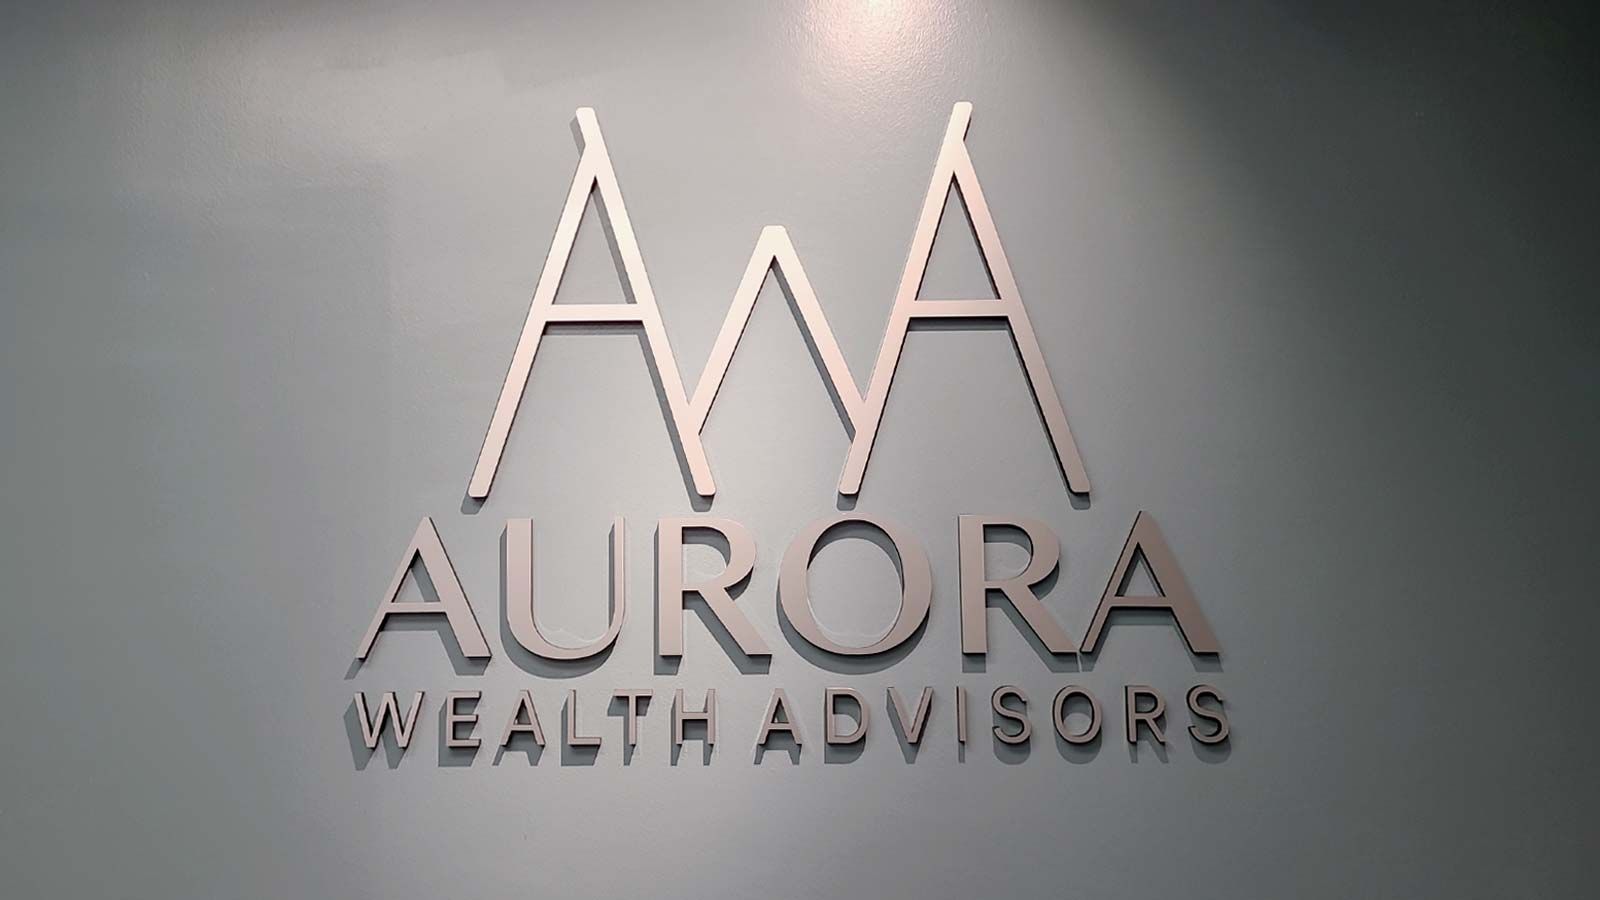 Aurora Health Advisors 3D sign attached to the wall